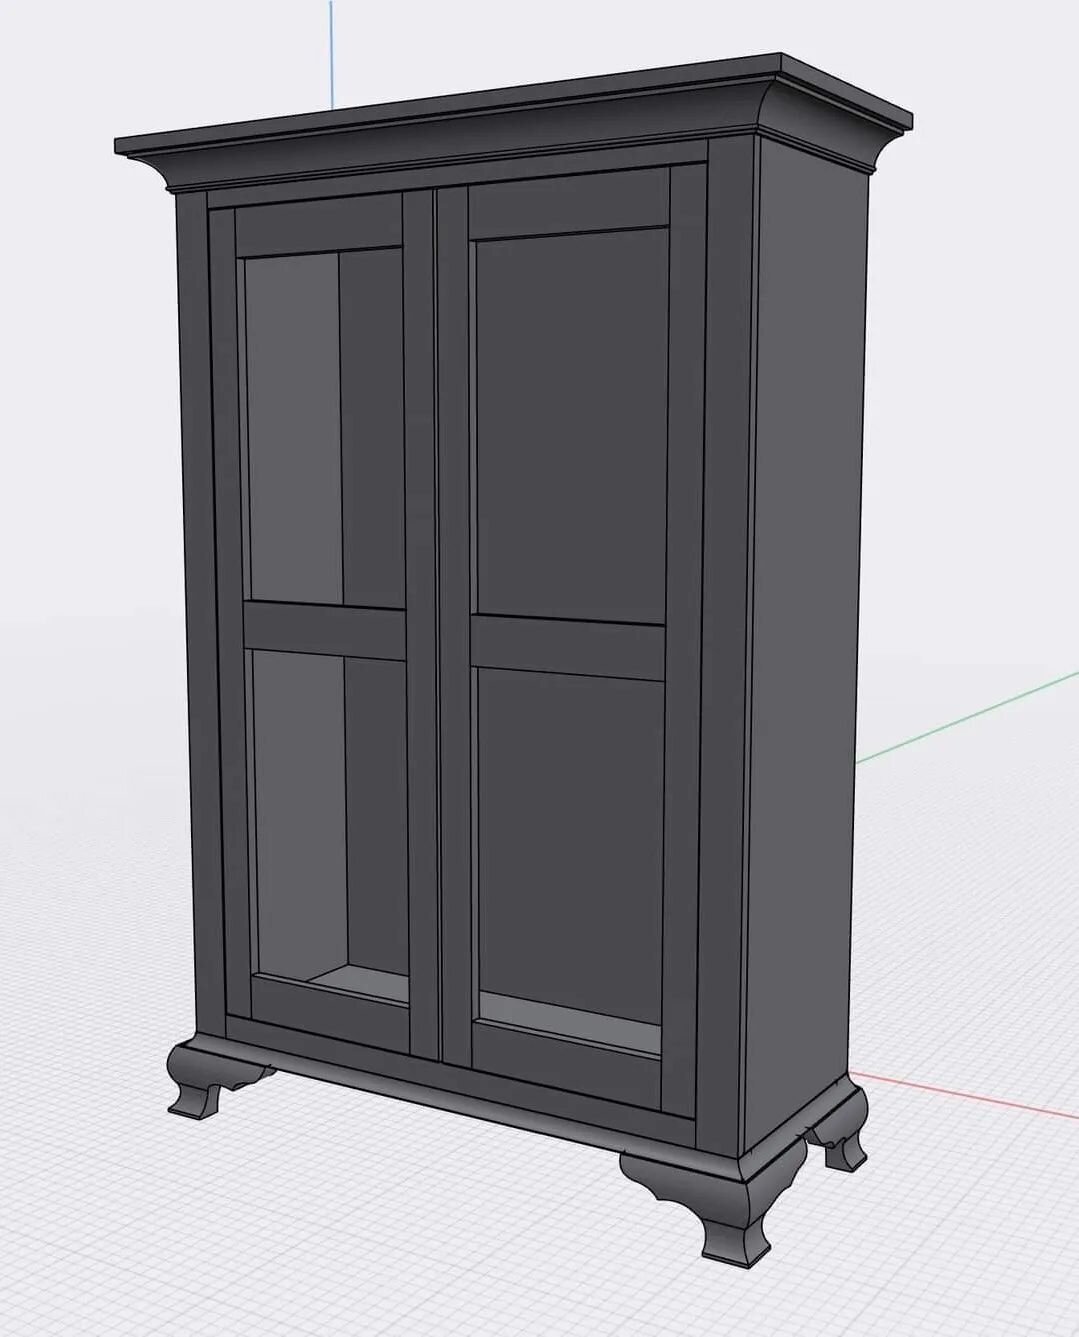 Nothing extraordinarily unique, but my next commission is definitely going to be a challenge. Receate an existing piece (china hutch) from another maker, but make it a china cabinet instead of a china hutch.

#woodshop #woodworking #woodworker #furni